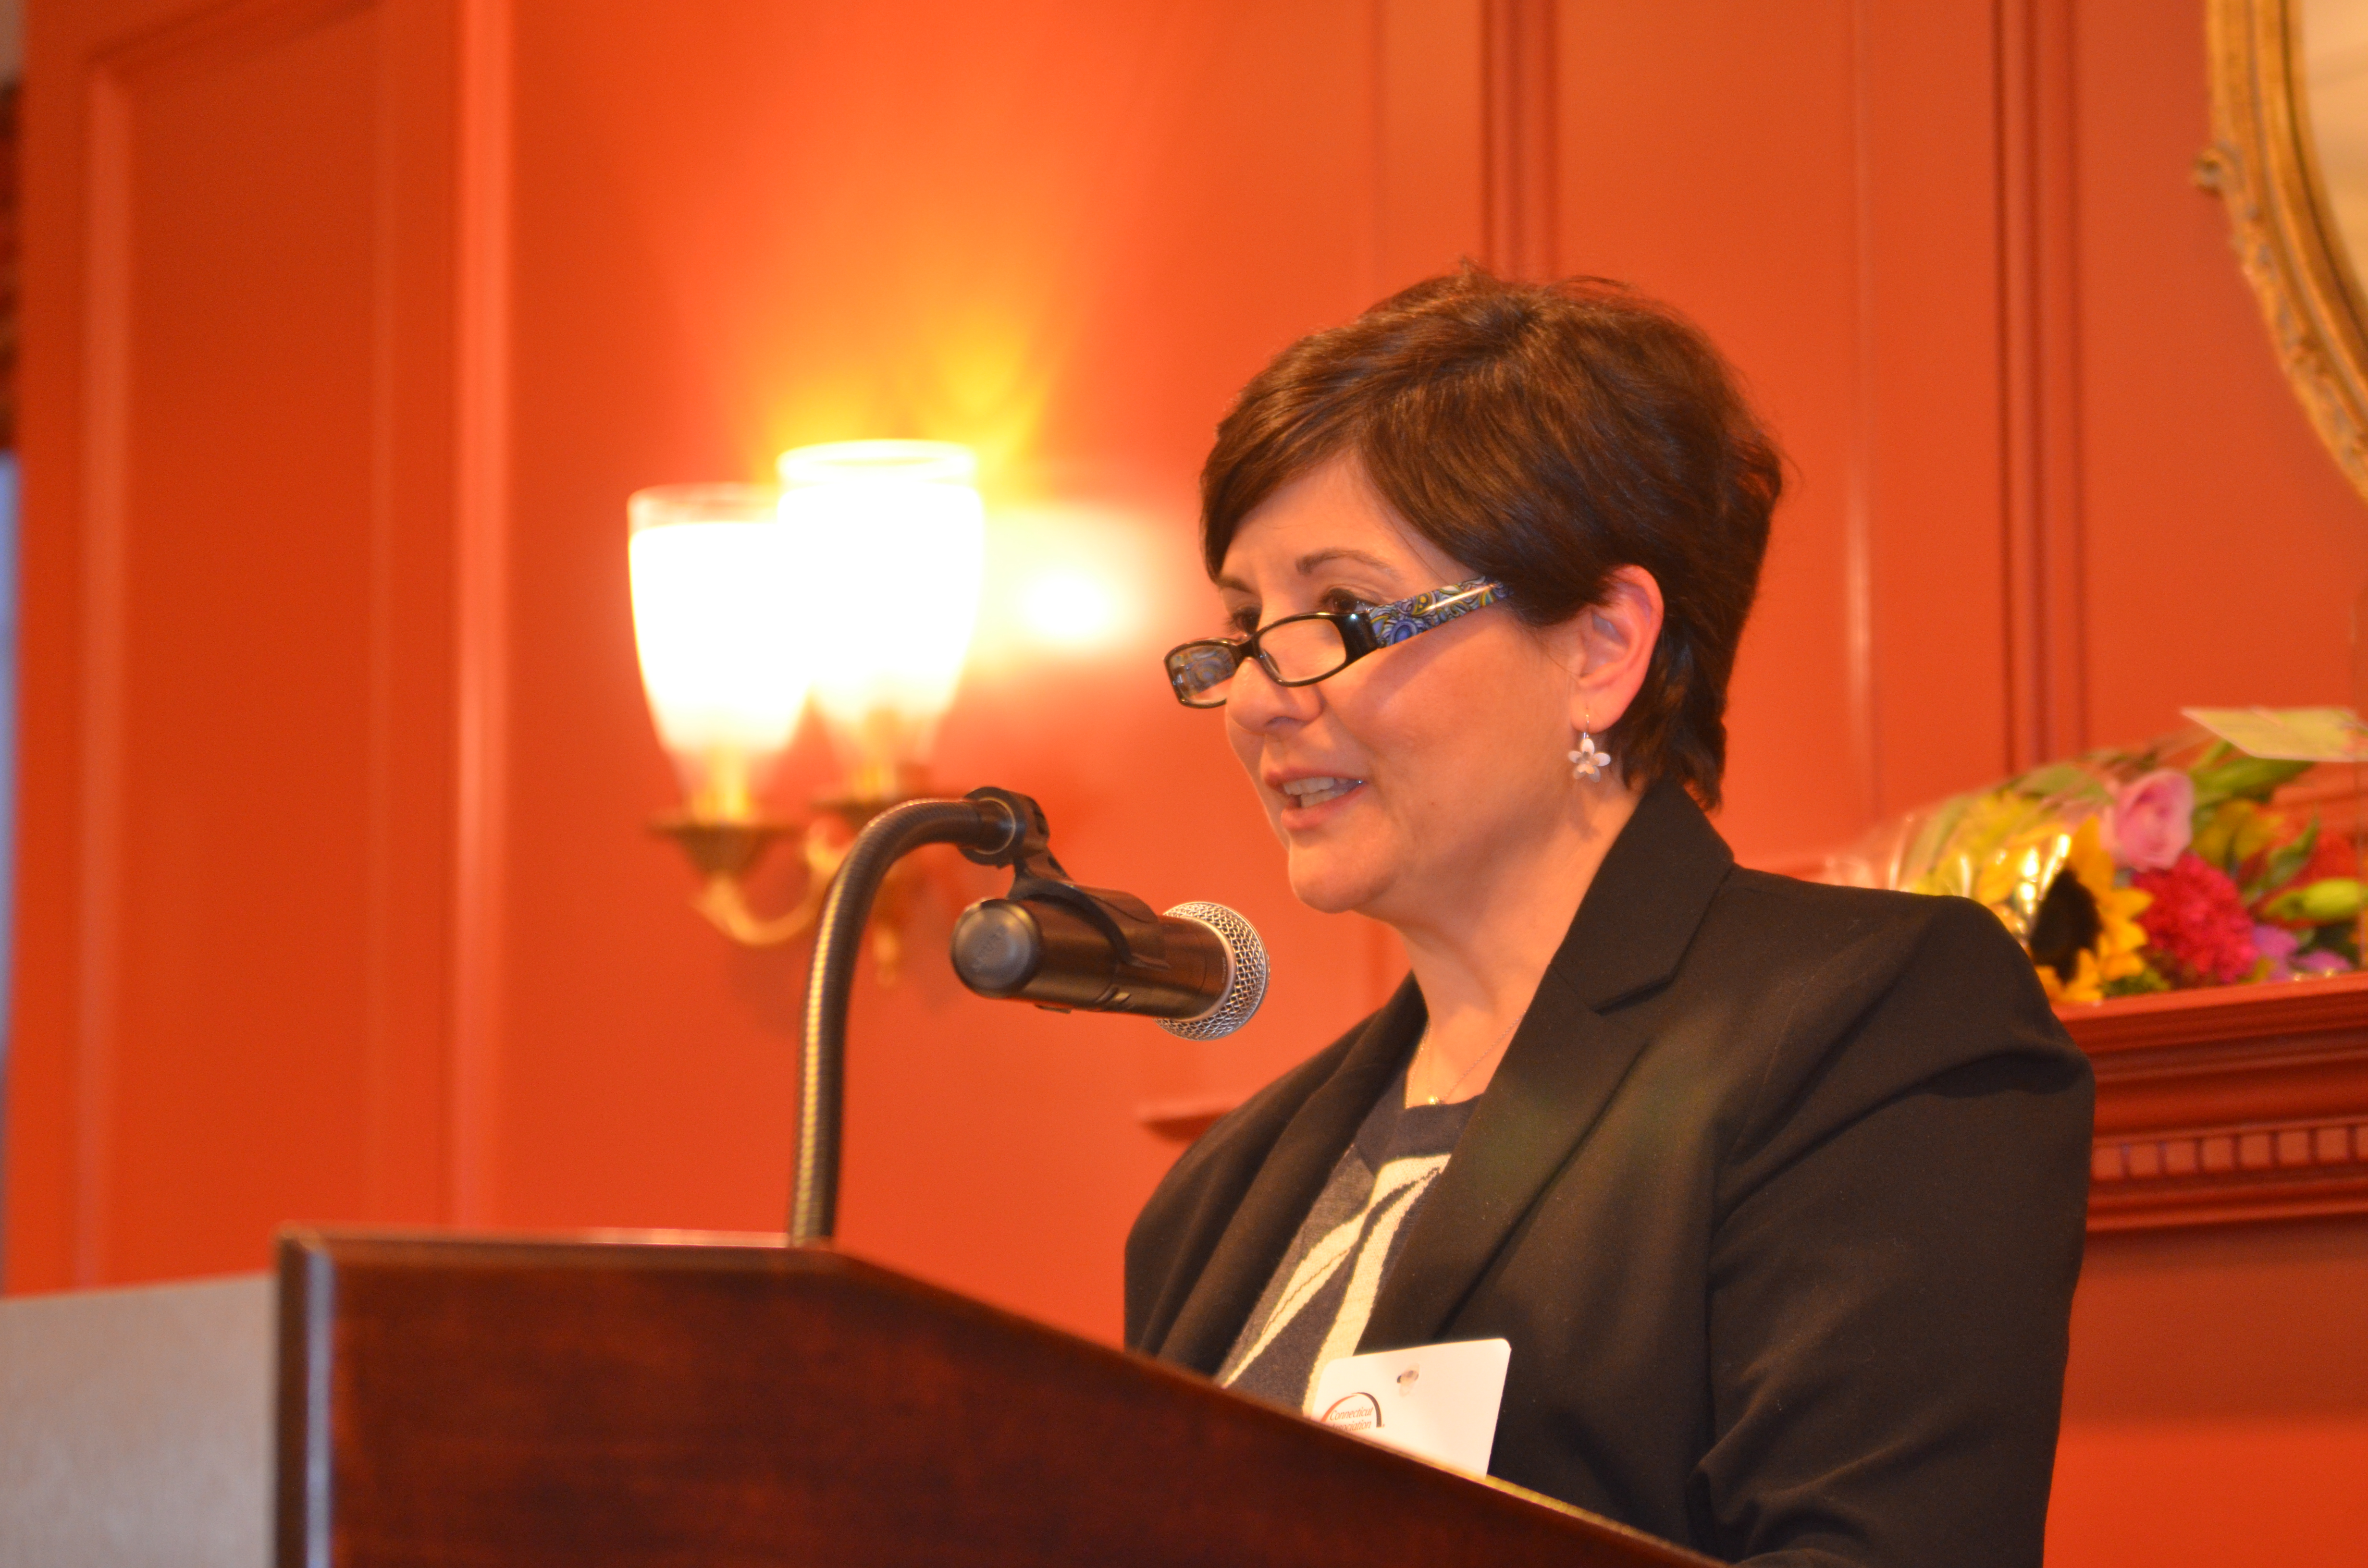 The Honorable Maria A. Kahn giving her acceptance speech